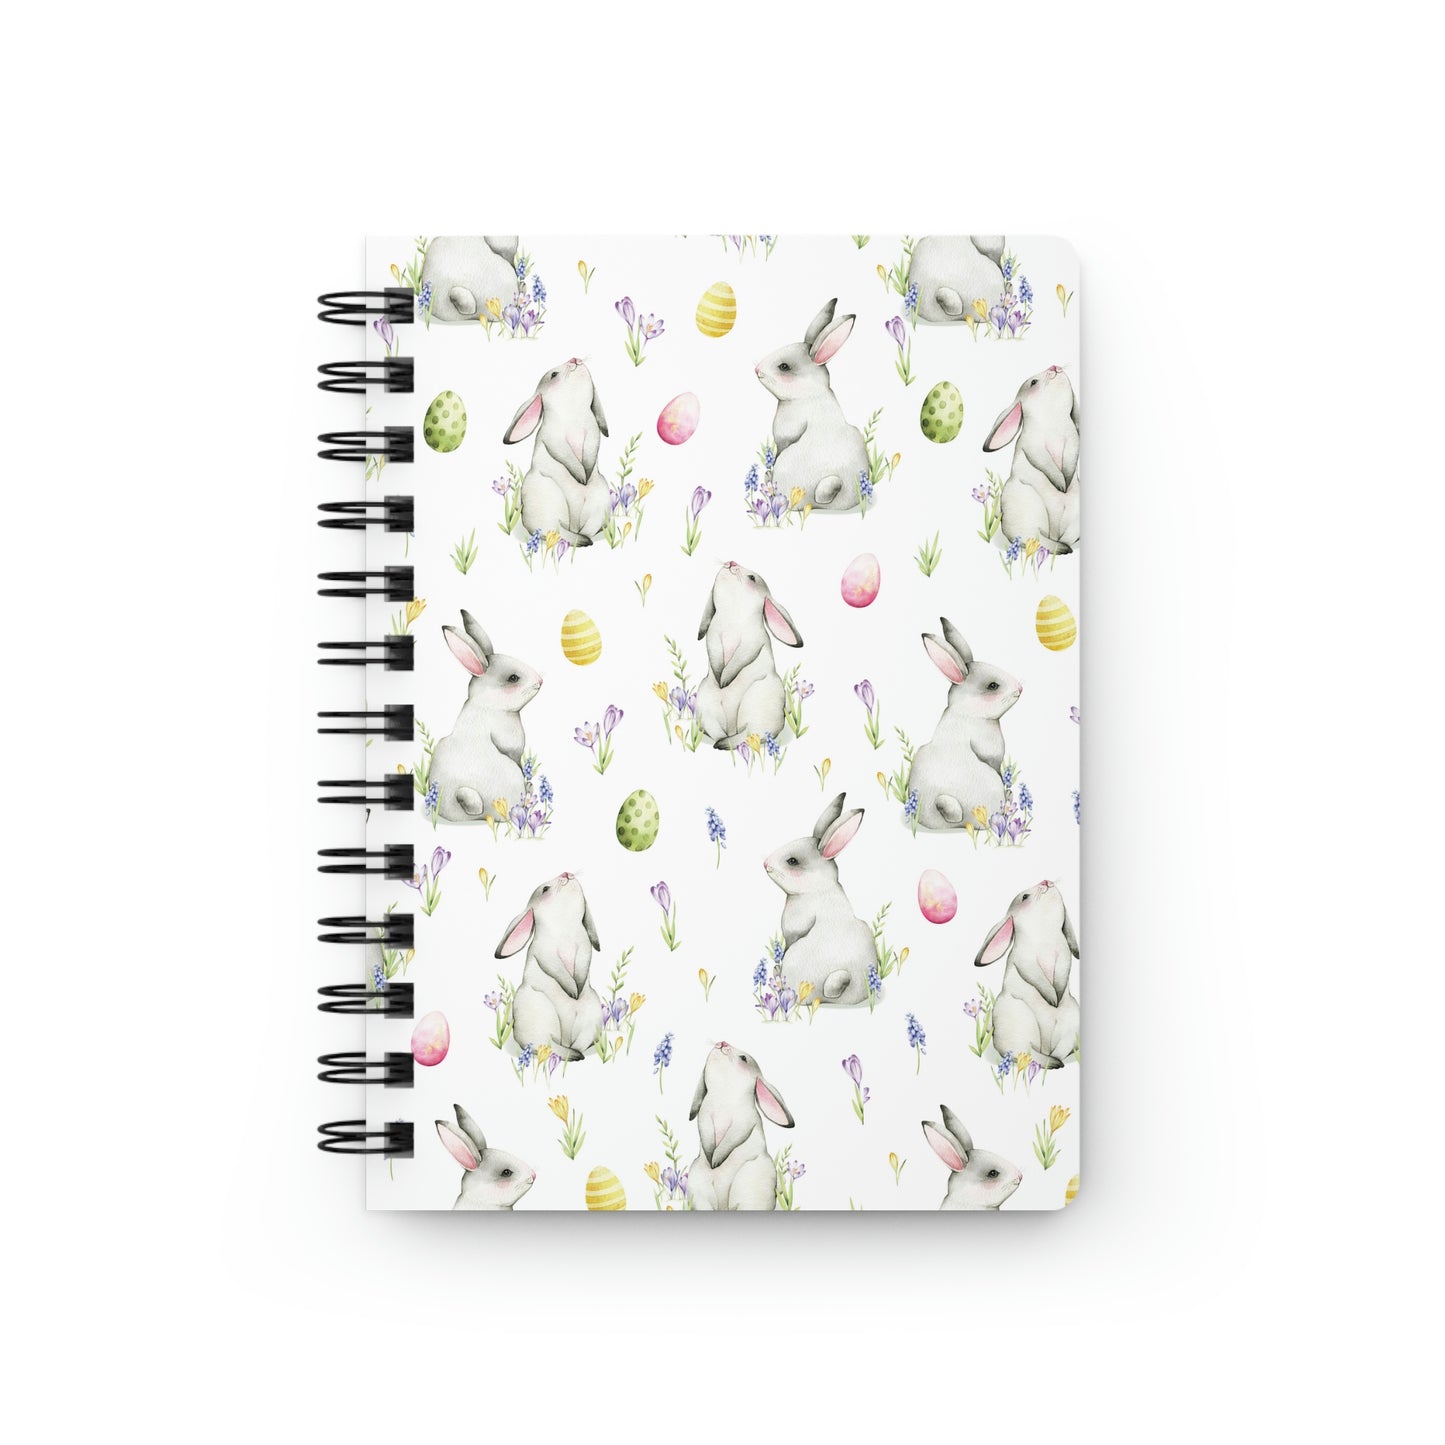 Cottontail Bunnies and Eggs Spiral Bound Journal